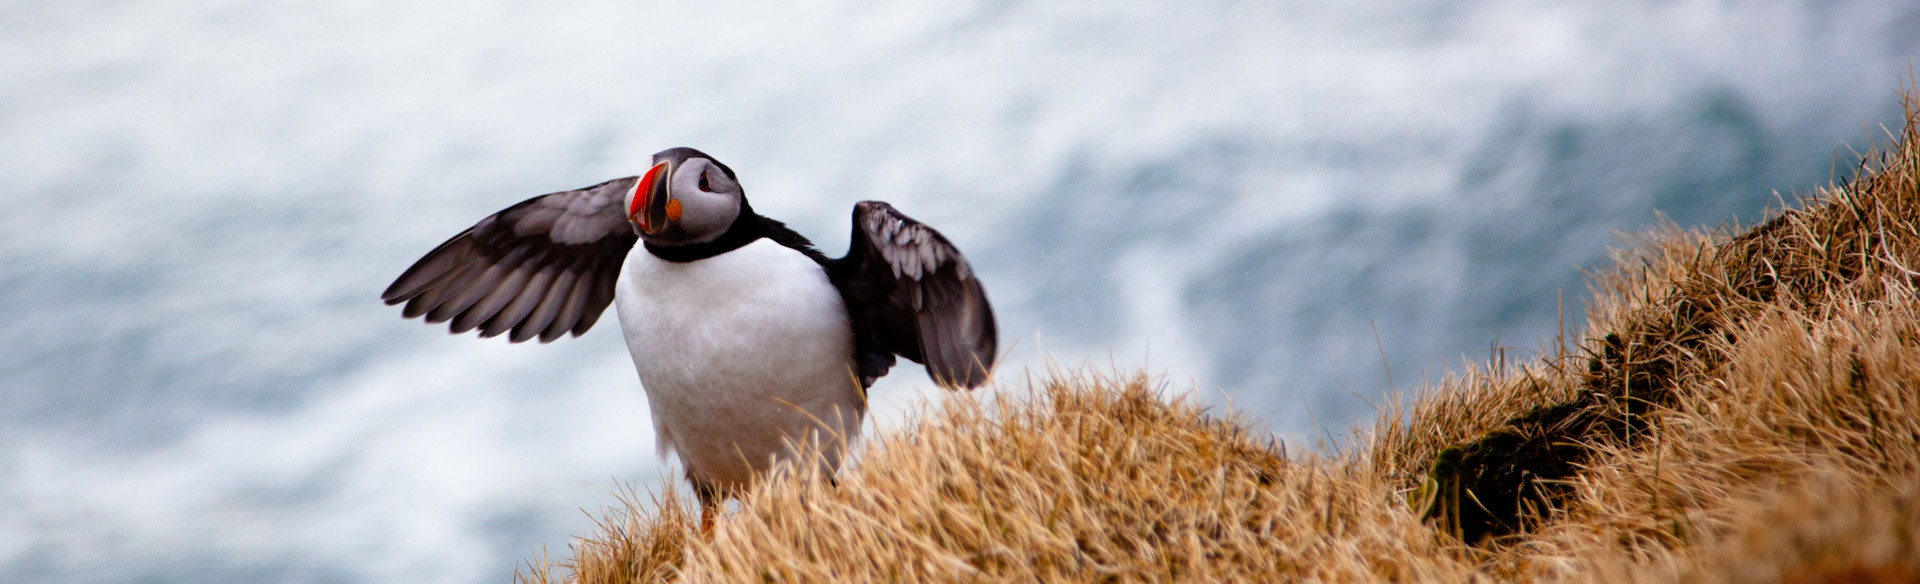 Puffin facts